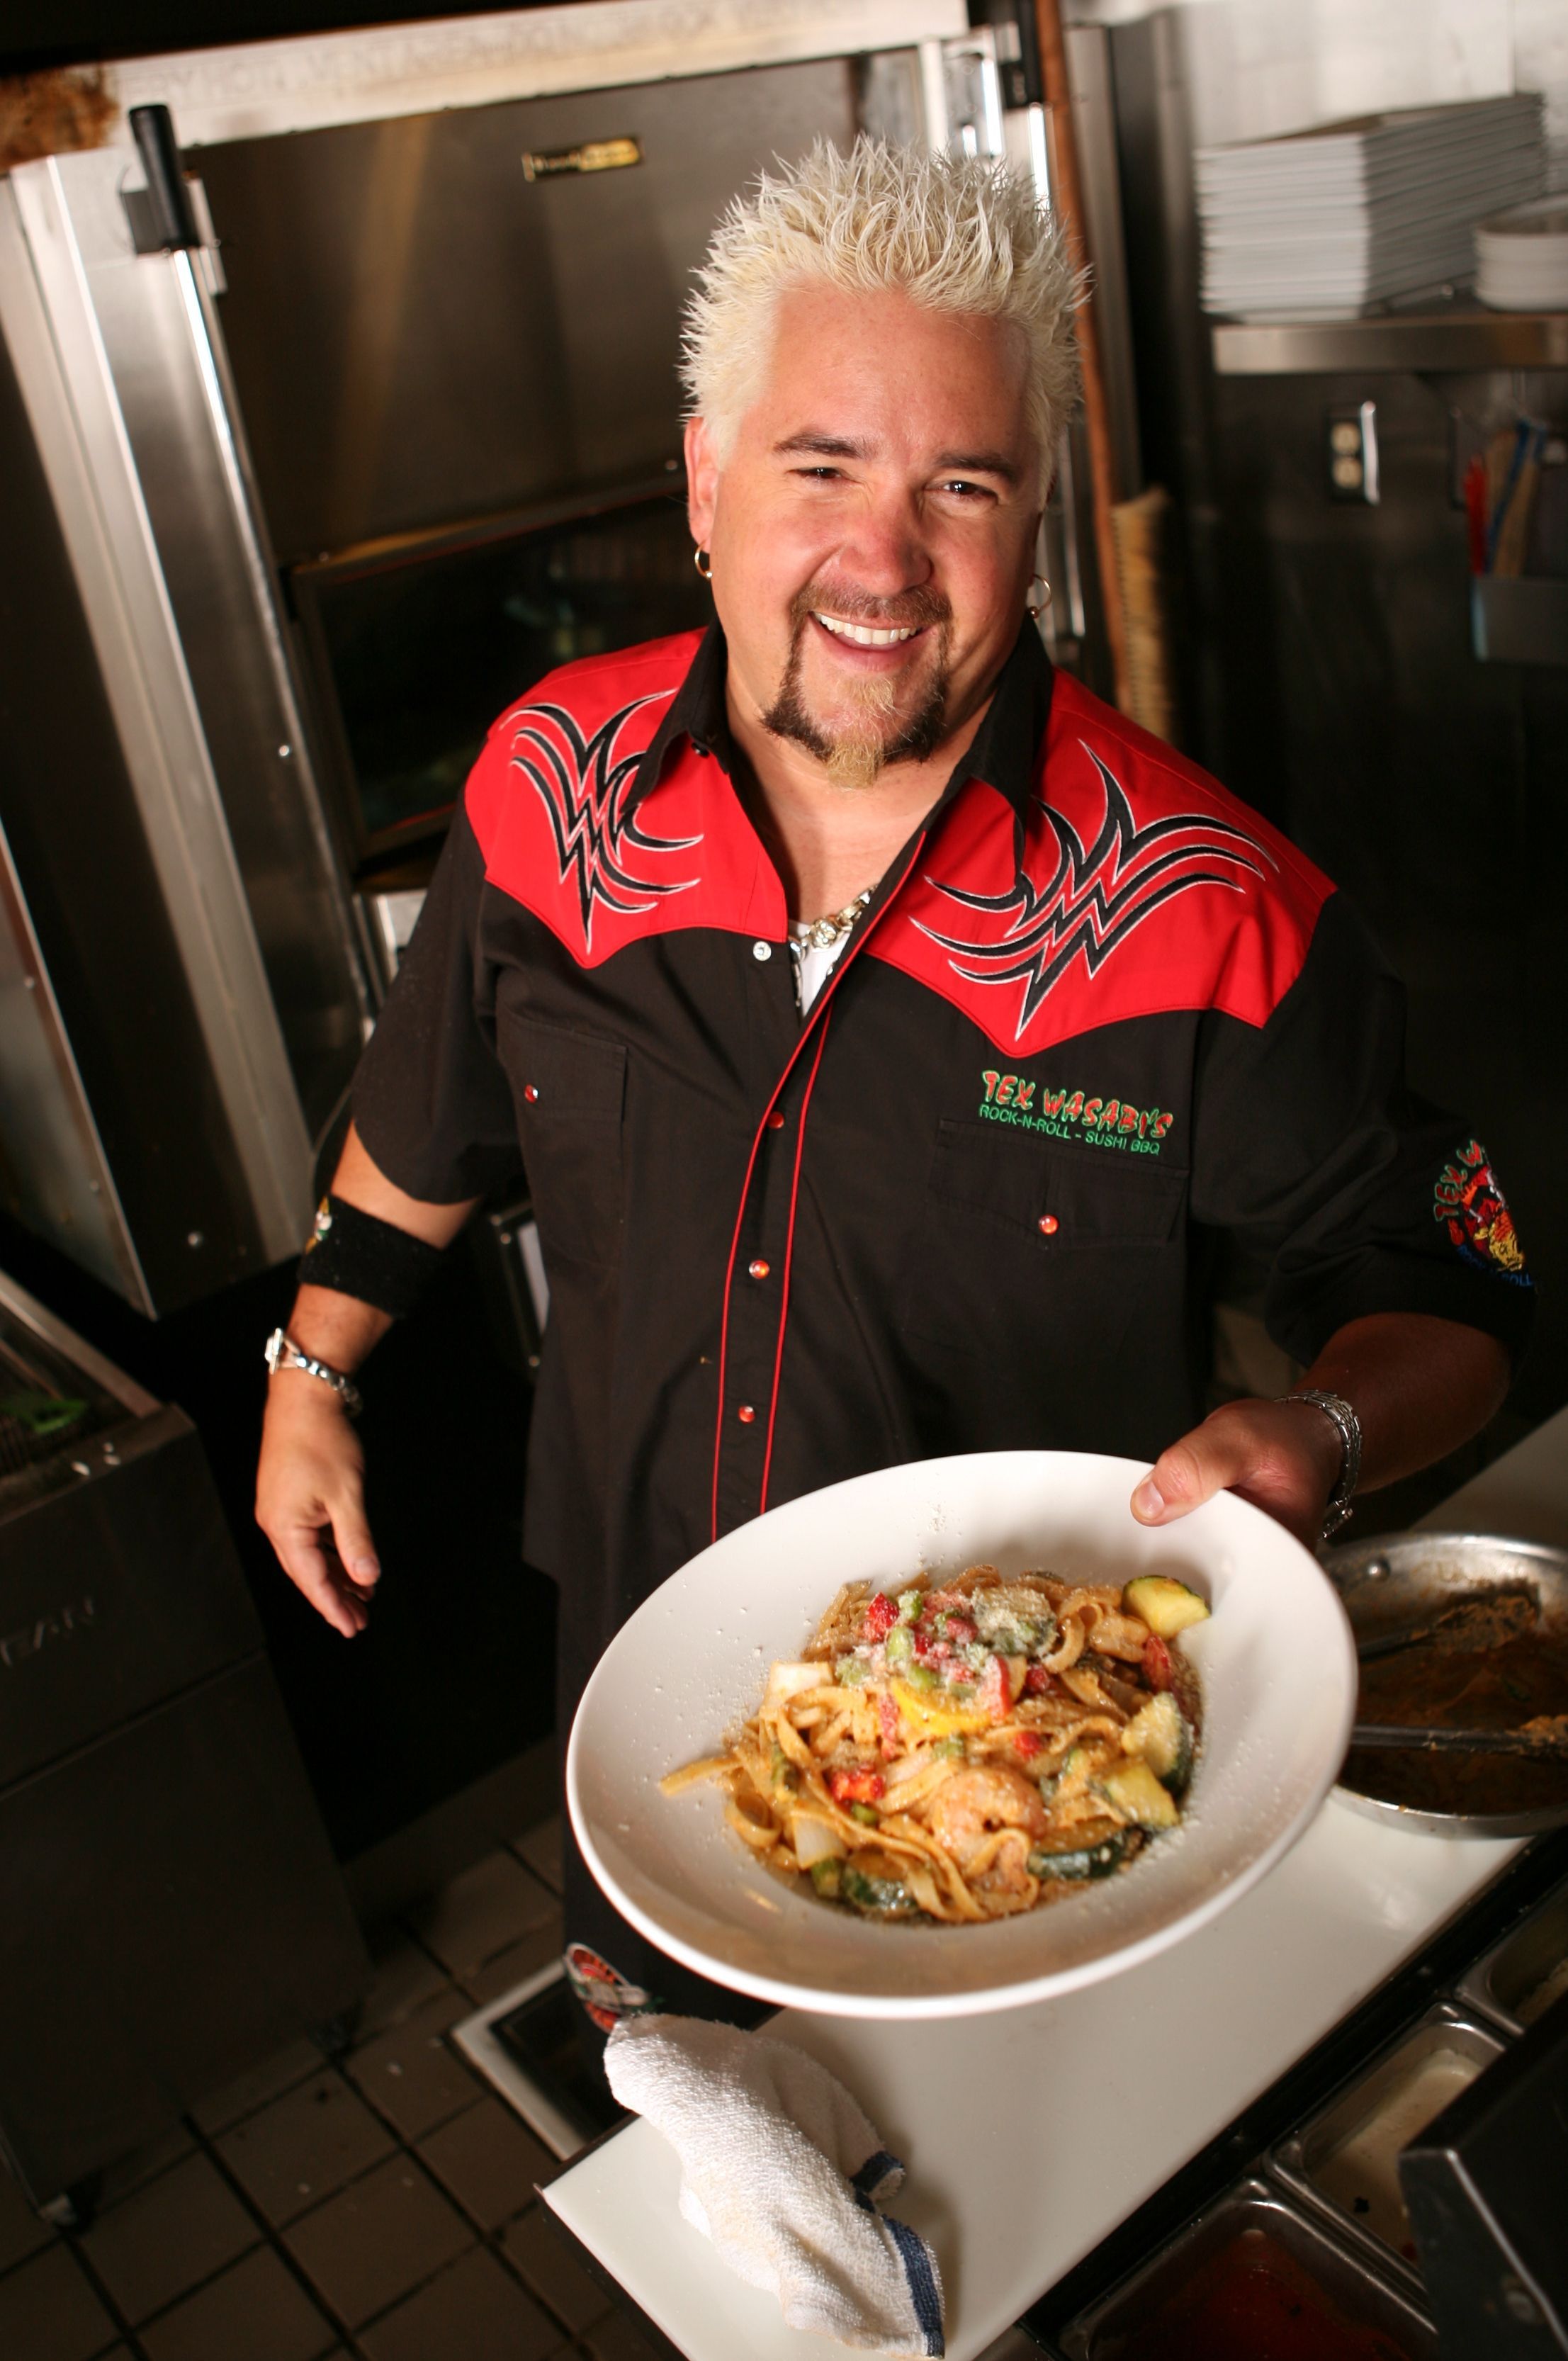 guy fieri holding out plate of food